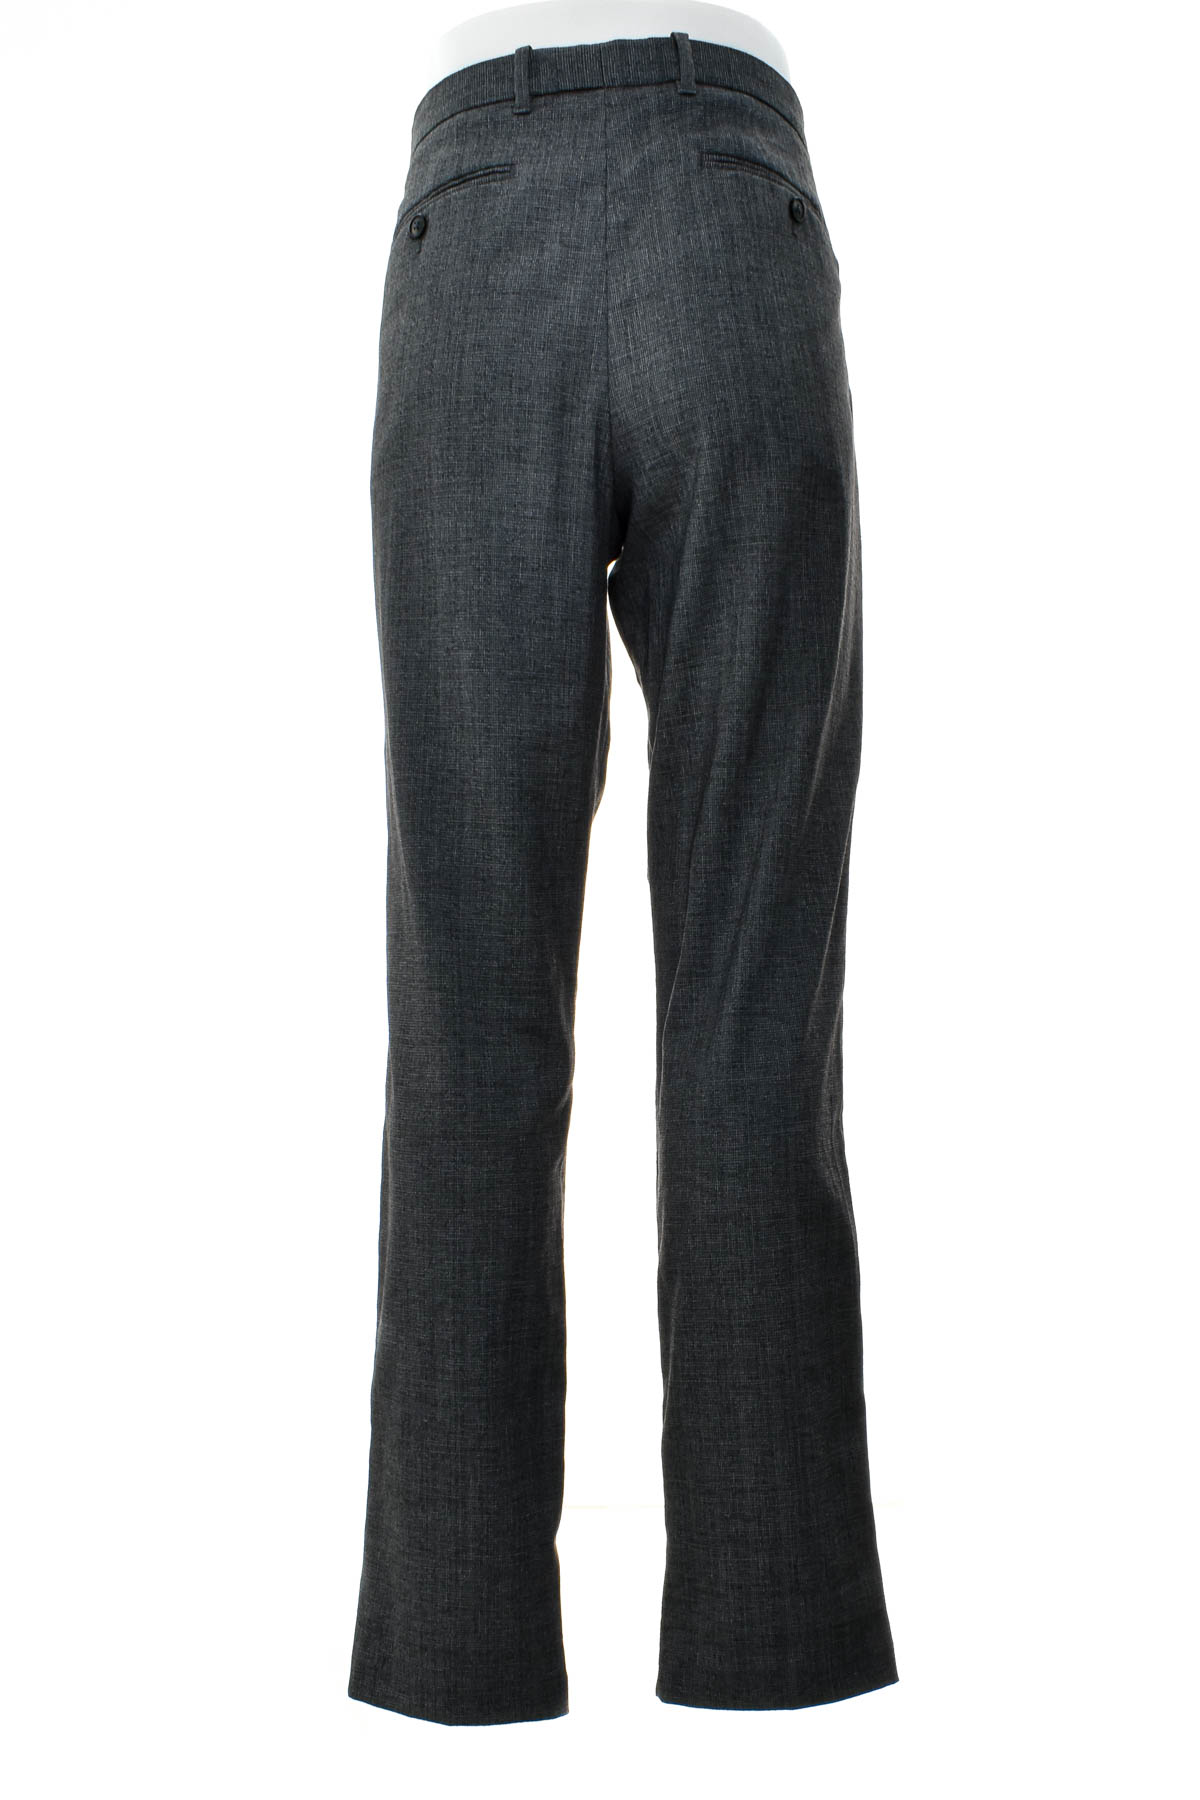 Men's trousers - Angelo Litrico - 1